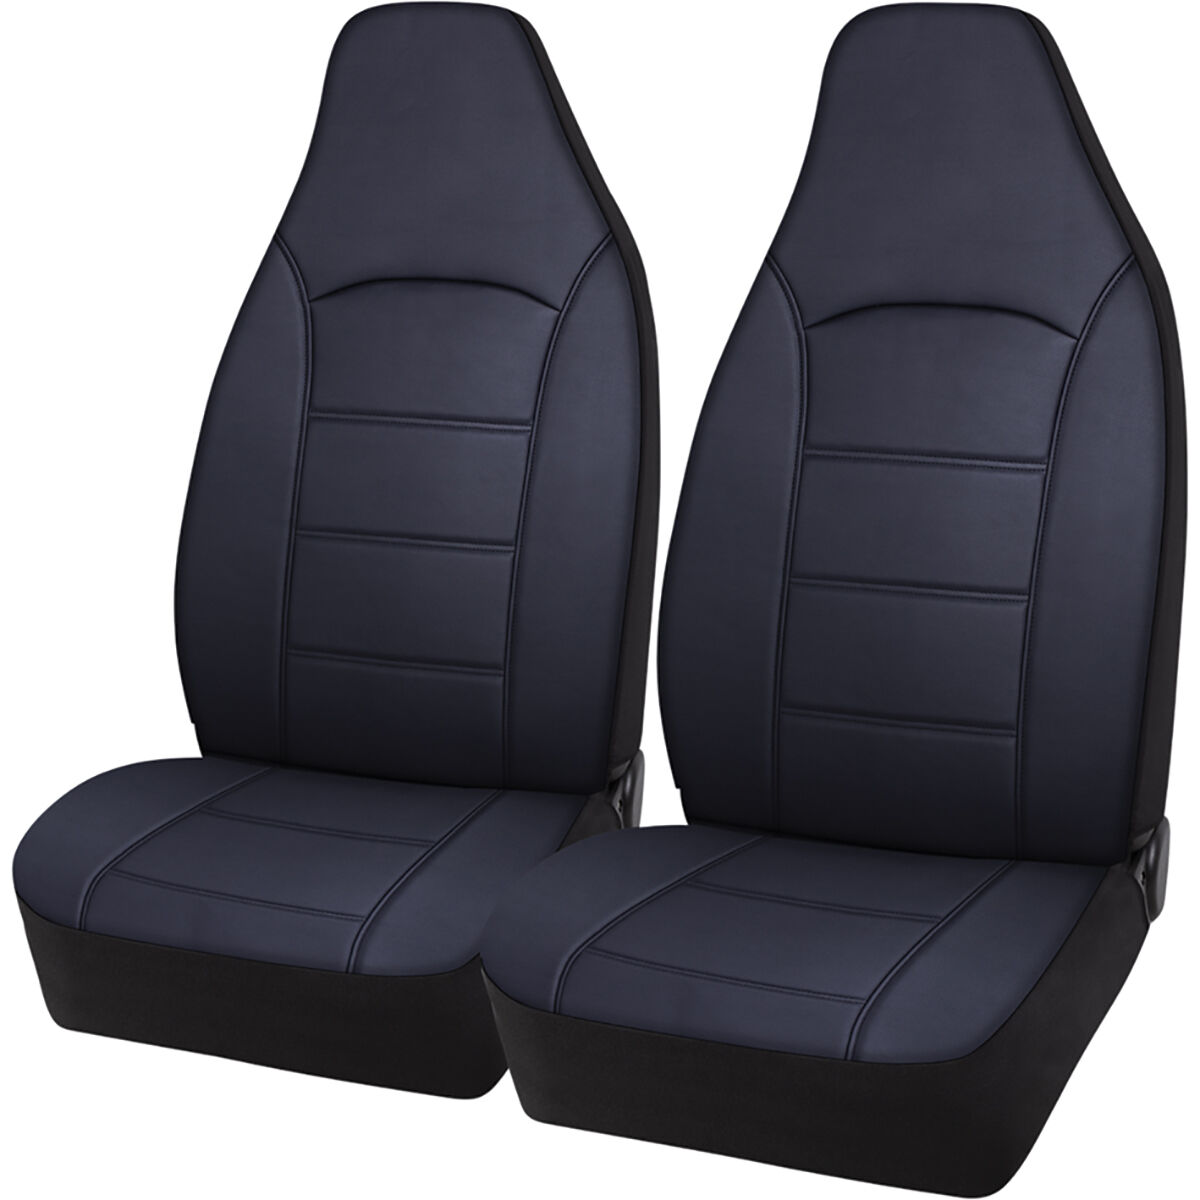 SCA Leather Look Seat Covers - Black, Build-In Headrests, Size 60